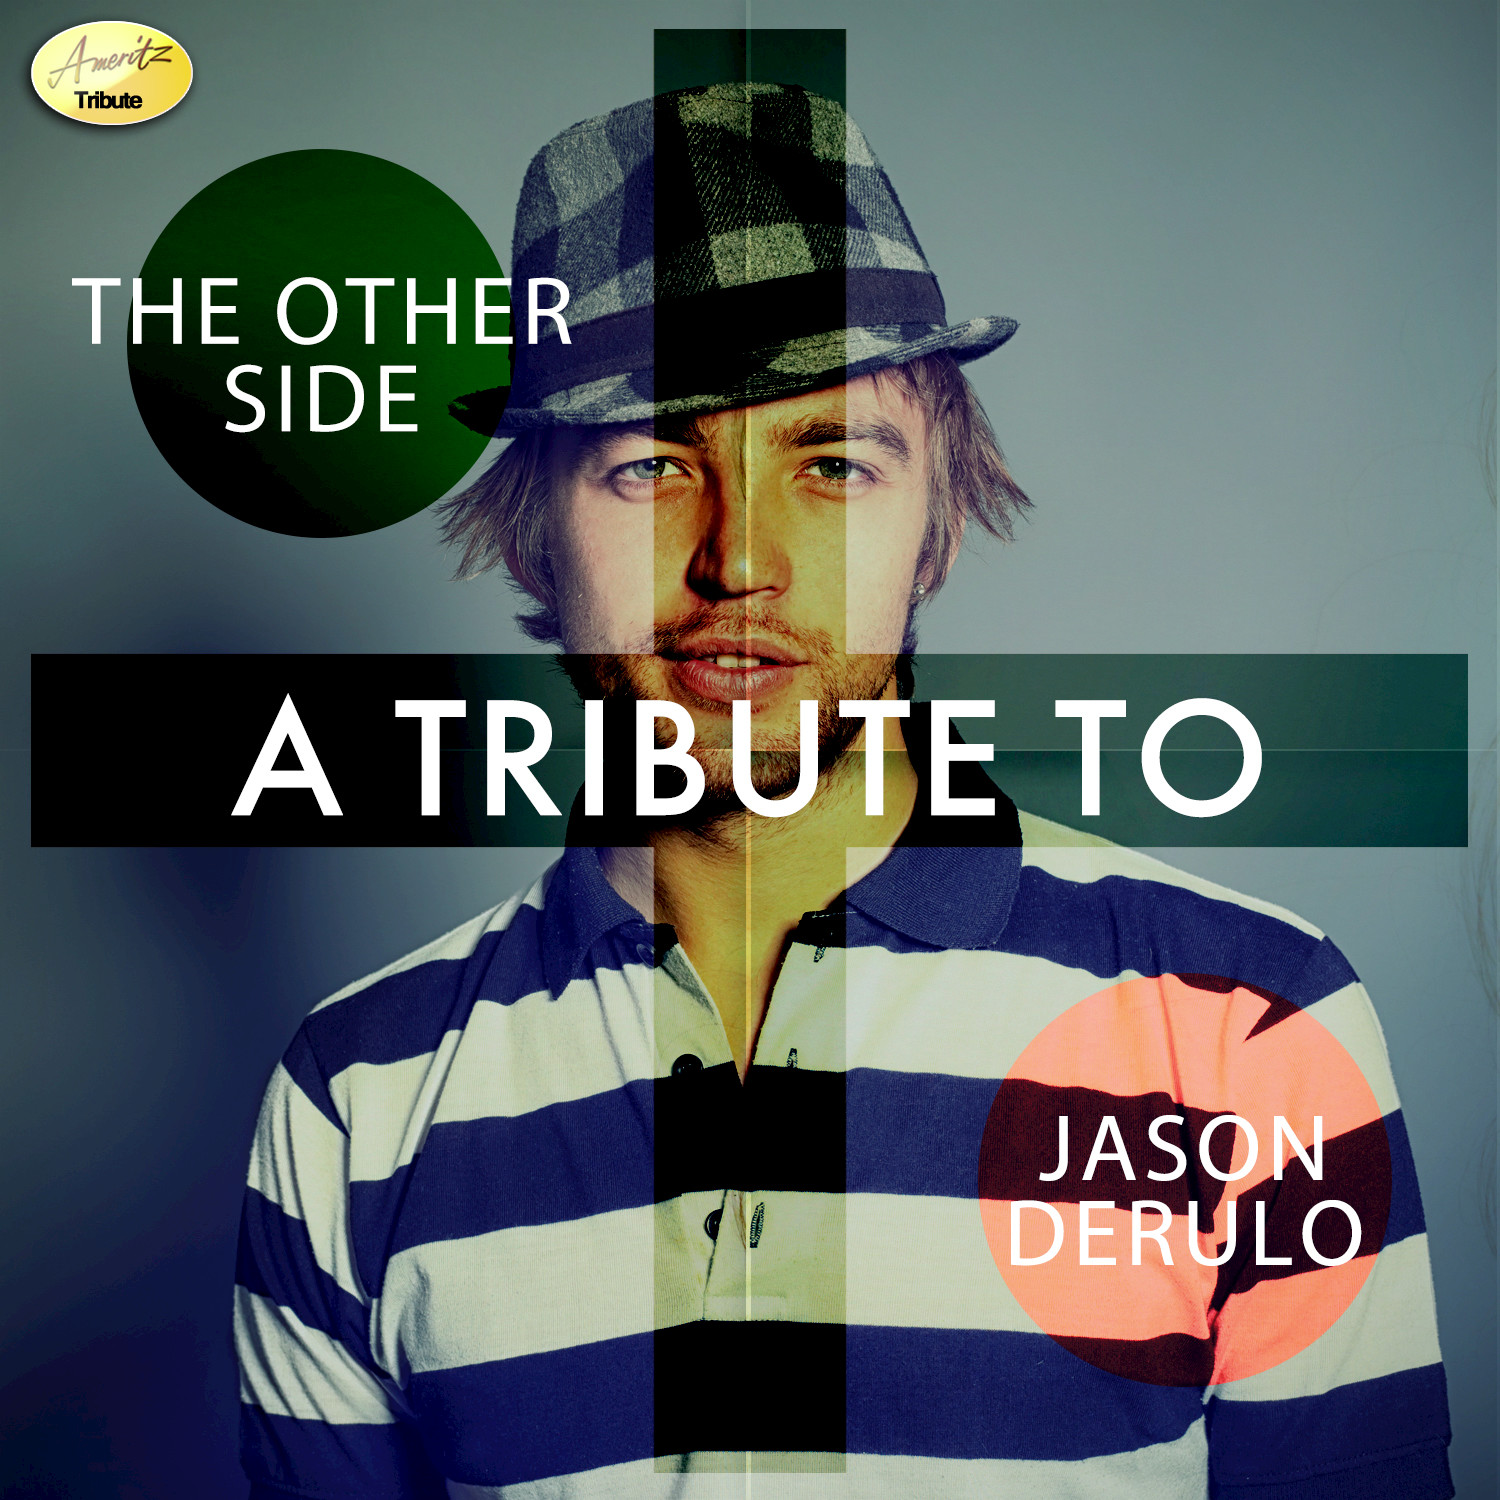 The Other Side - A Tribute to Jason Derulo